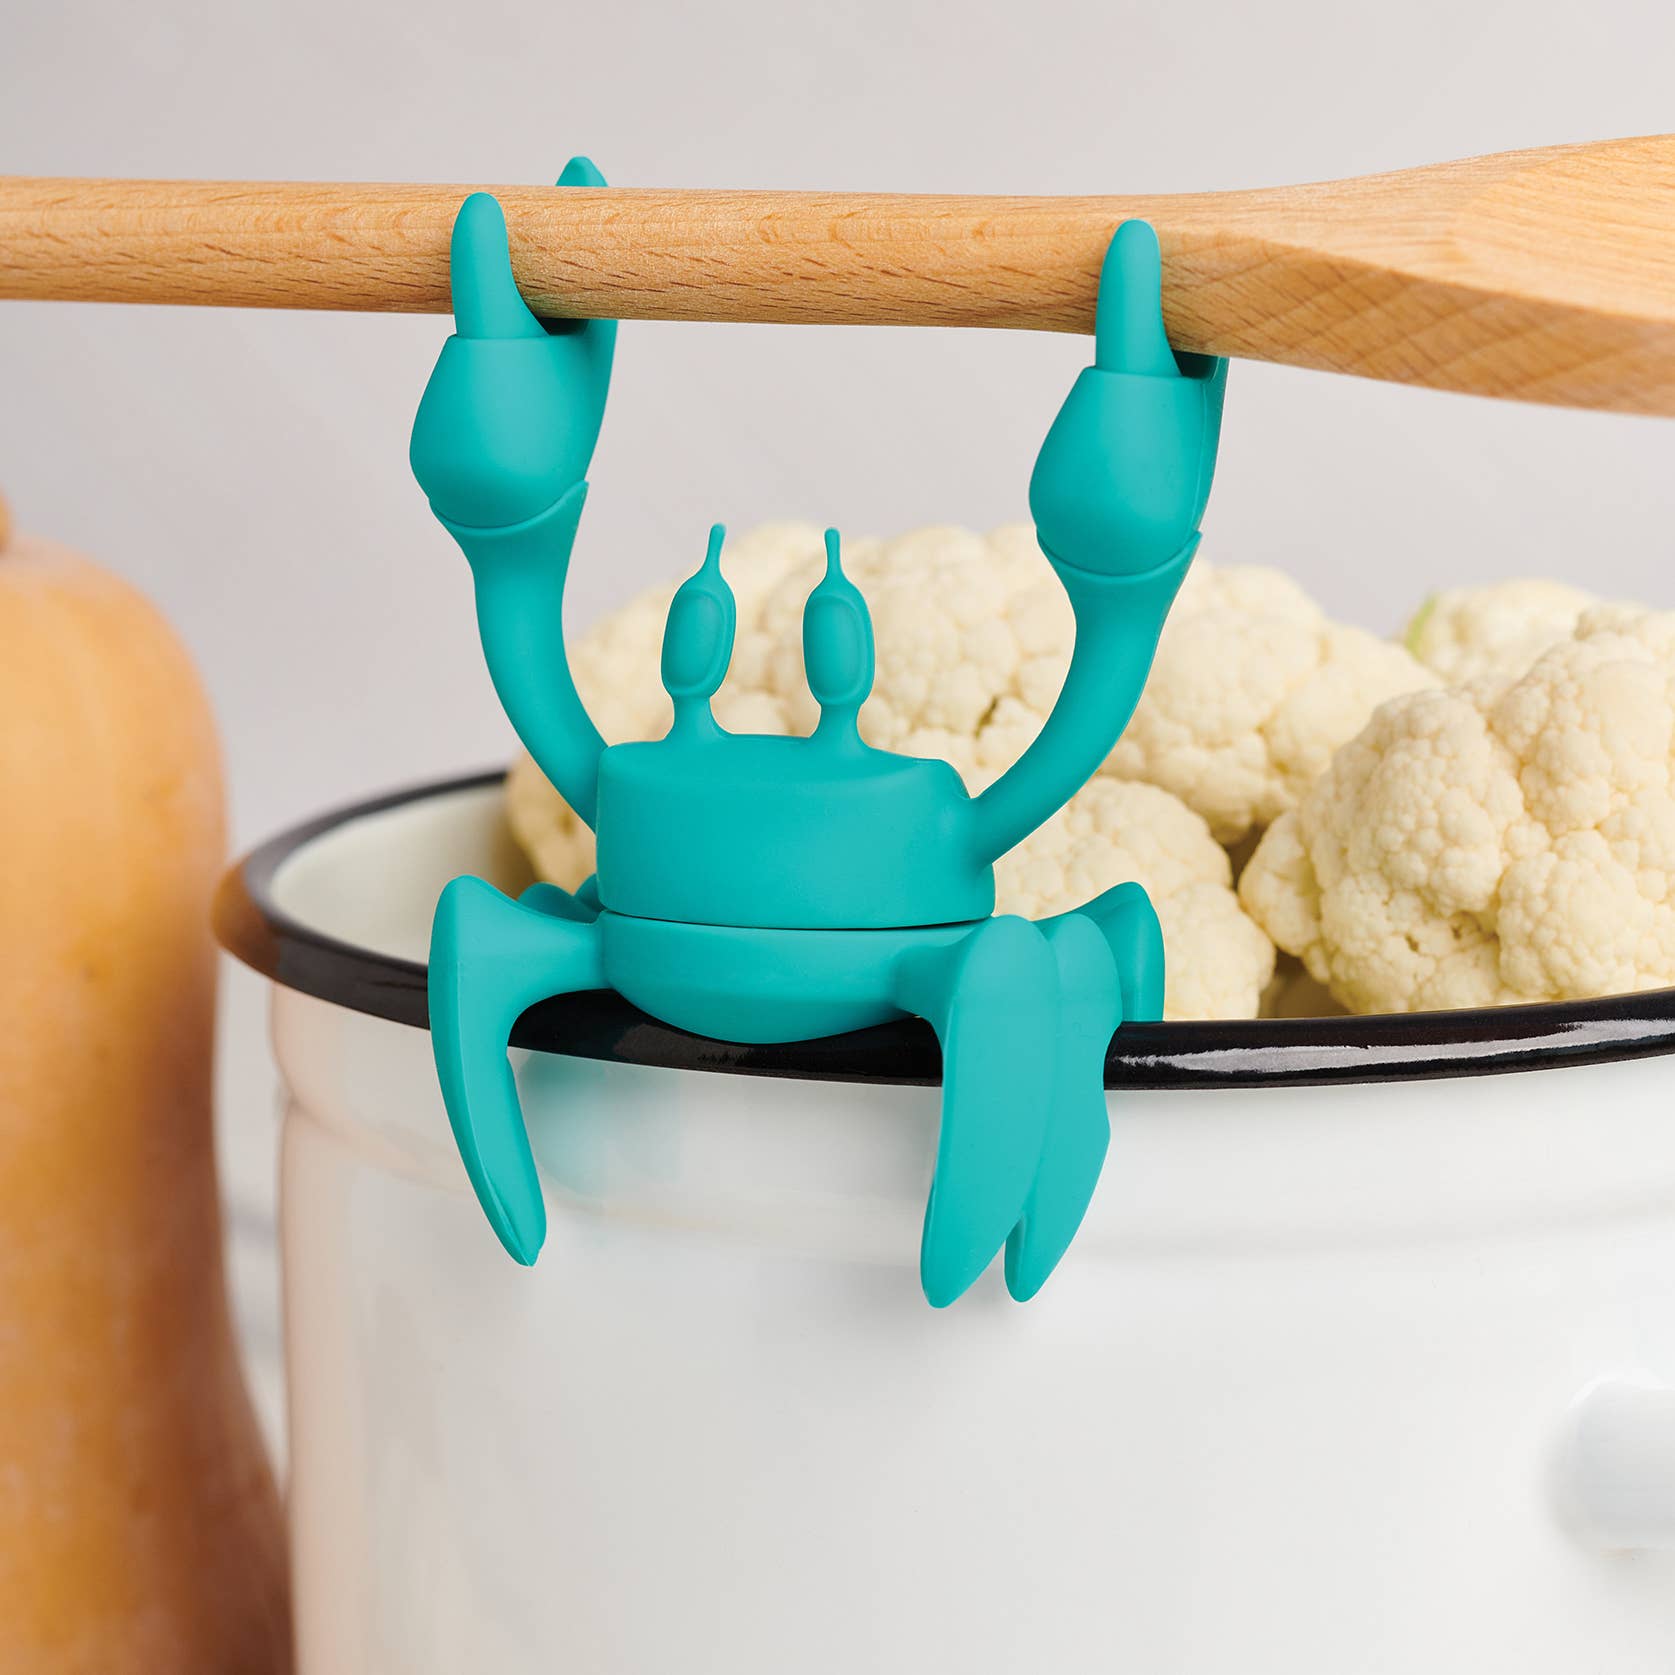 NEW! Red Crab Spoon Holder Steam Releaser- Ototo